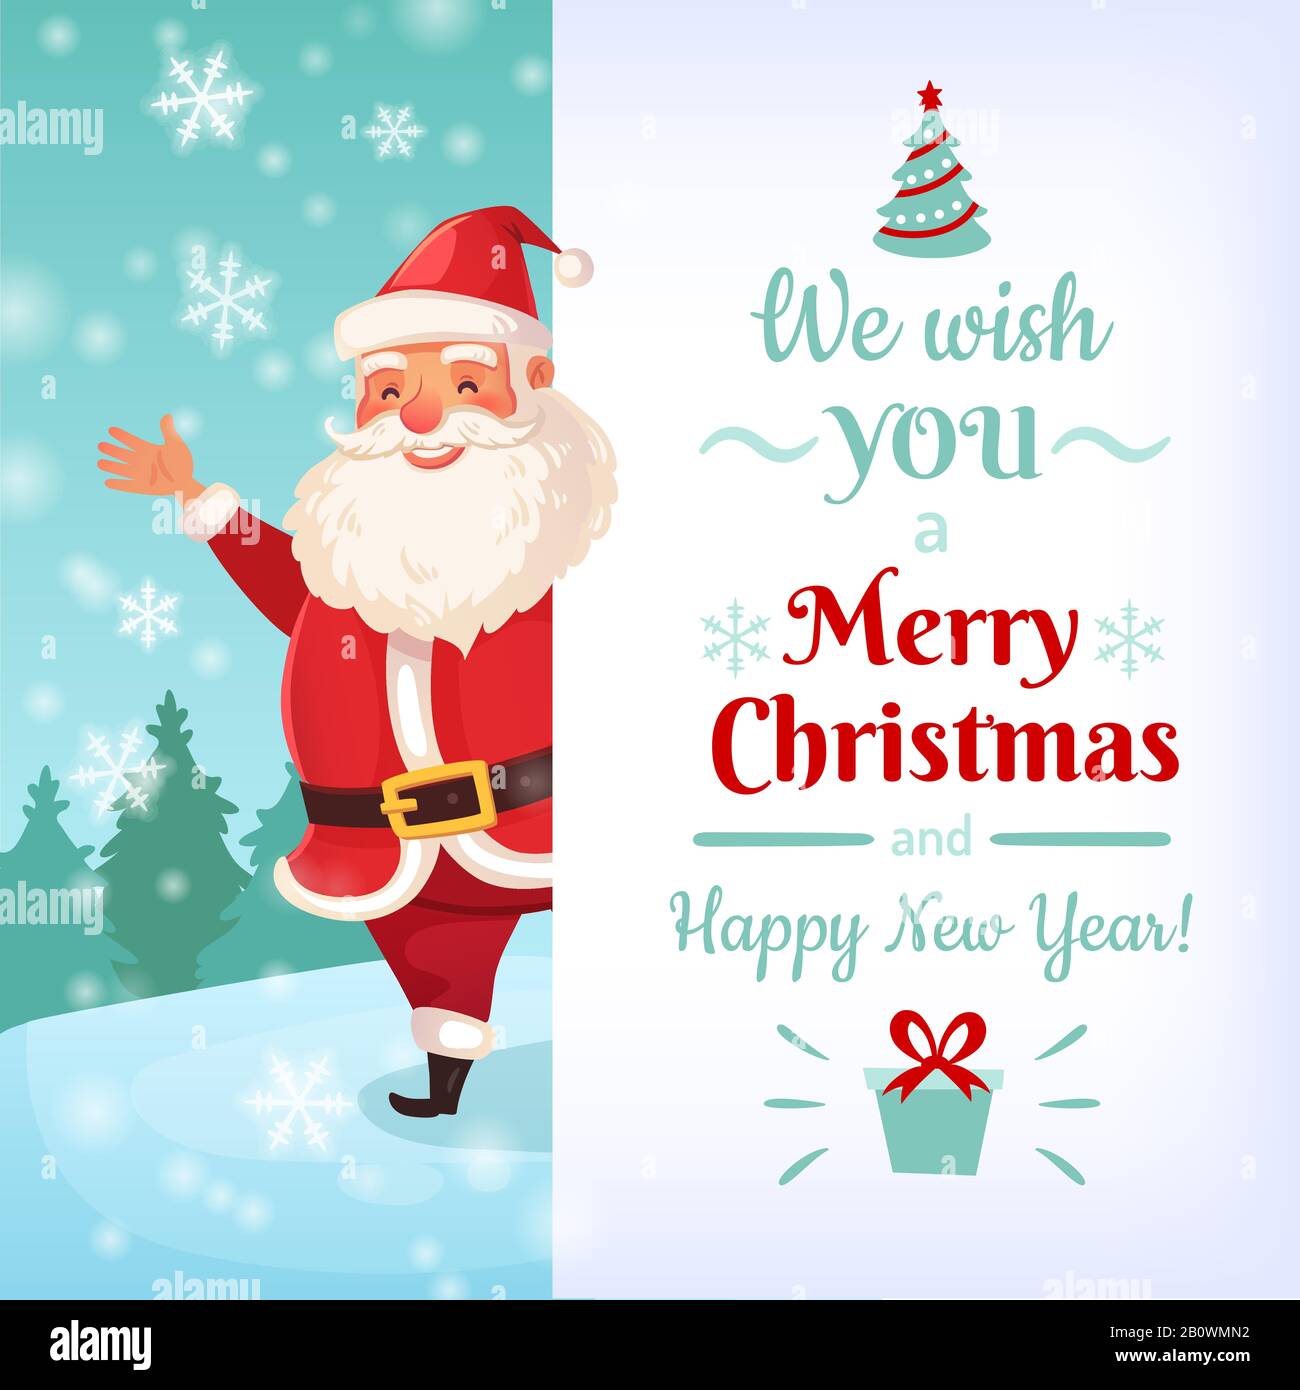 Merry Christmas card. Santa Claus greeting cards template, winter holidays banner vector illustration Stock Vector